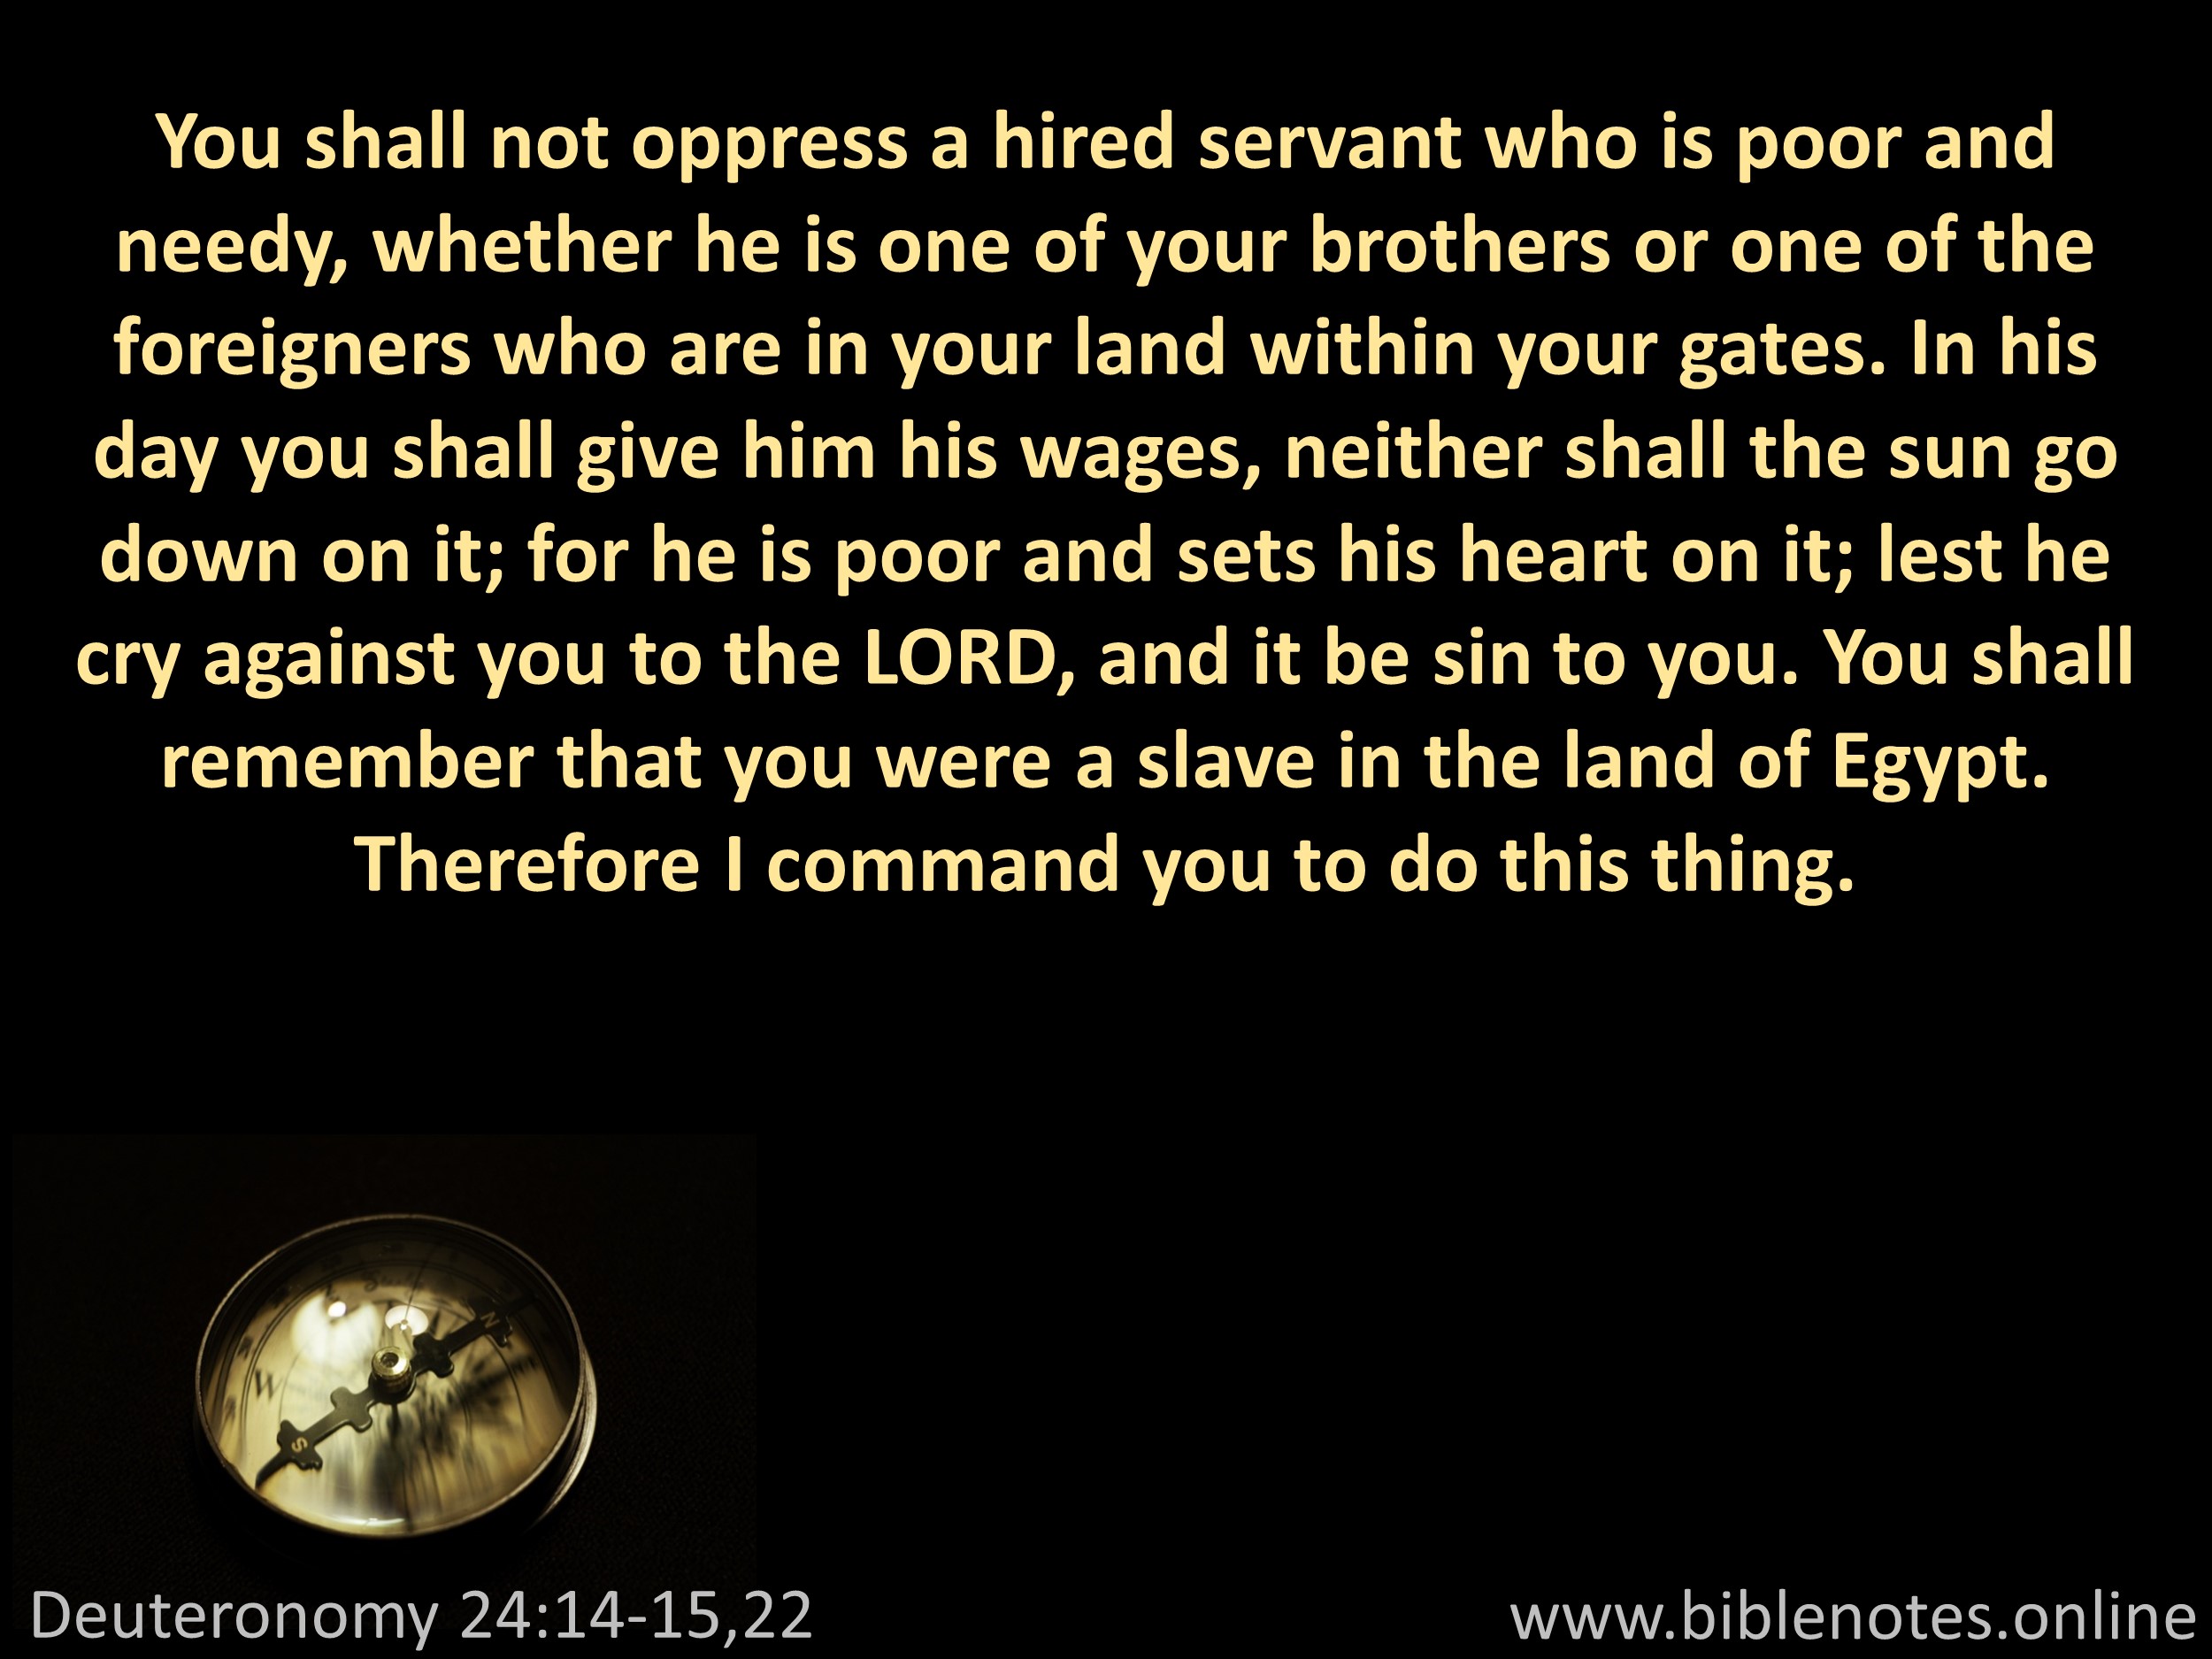 Bible Verse from Deuteronomy Chapter 24